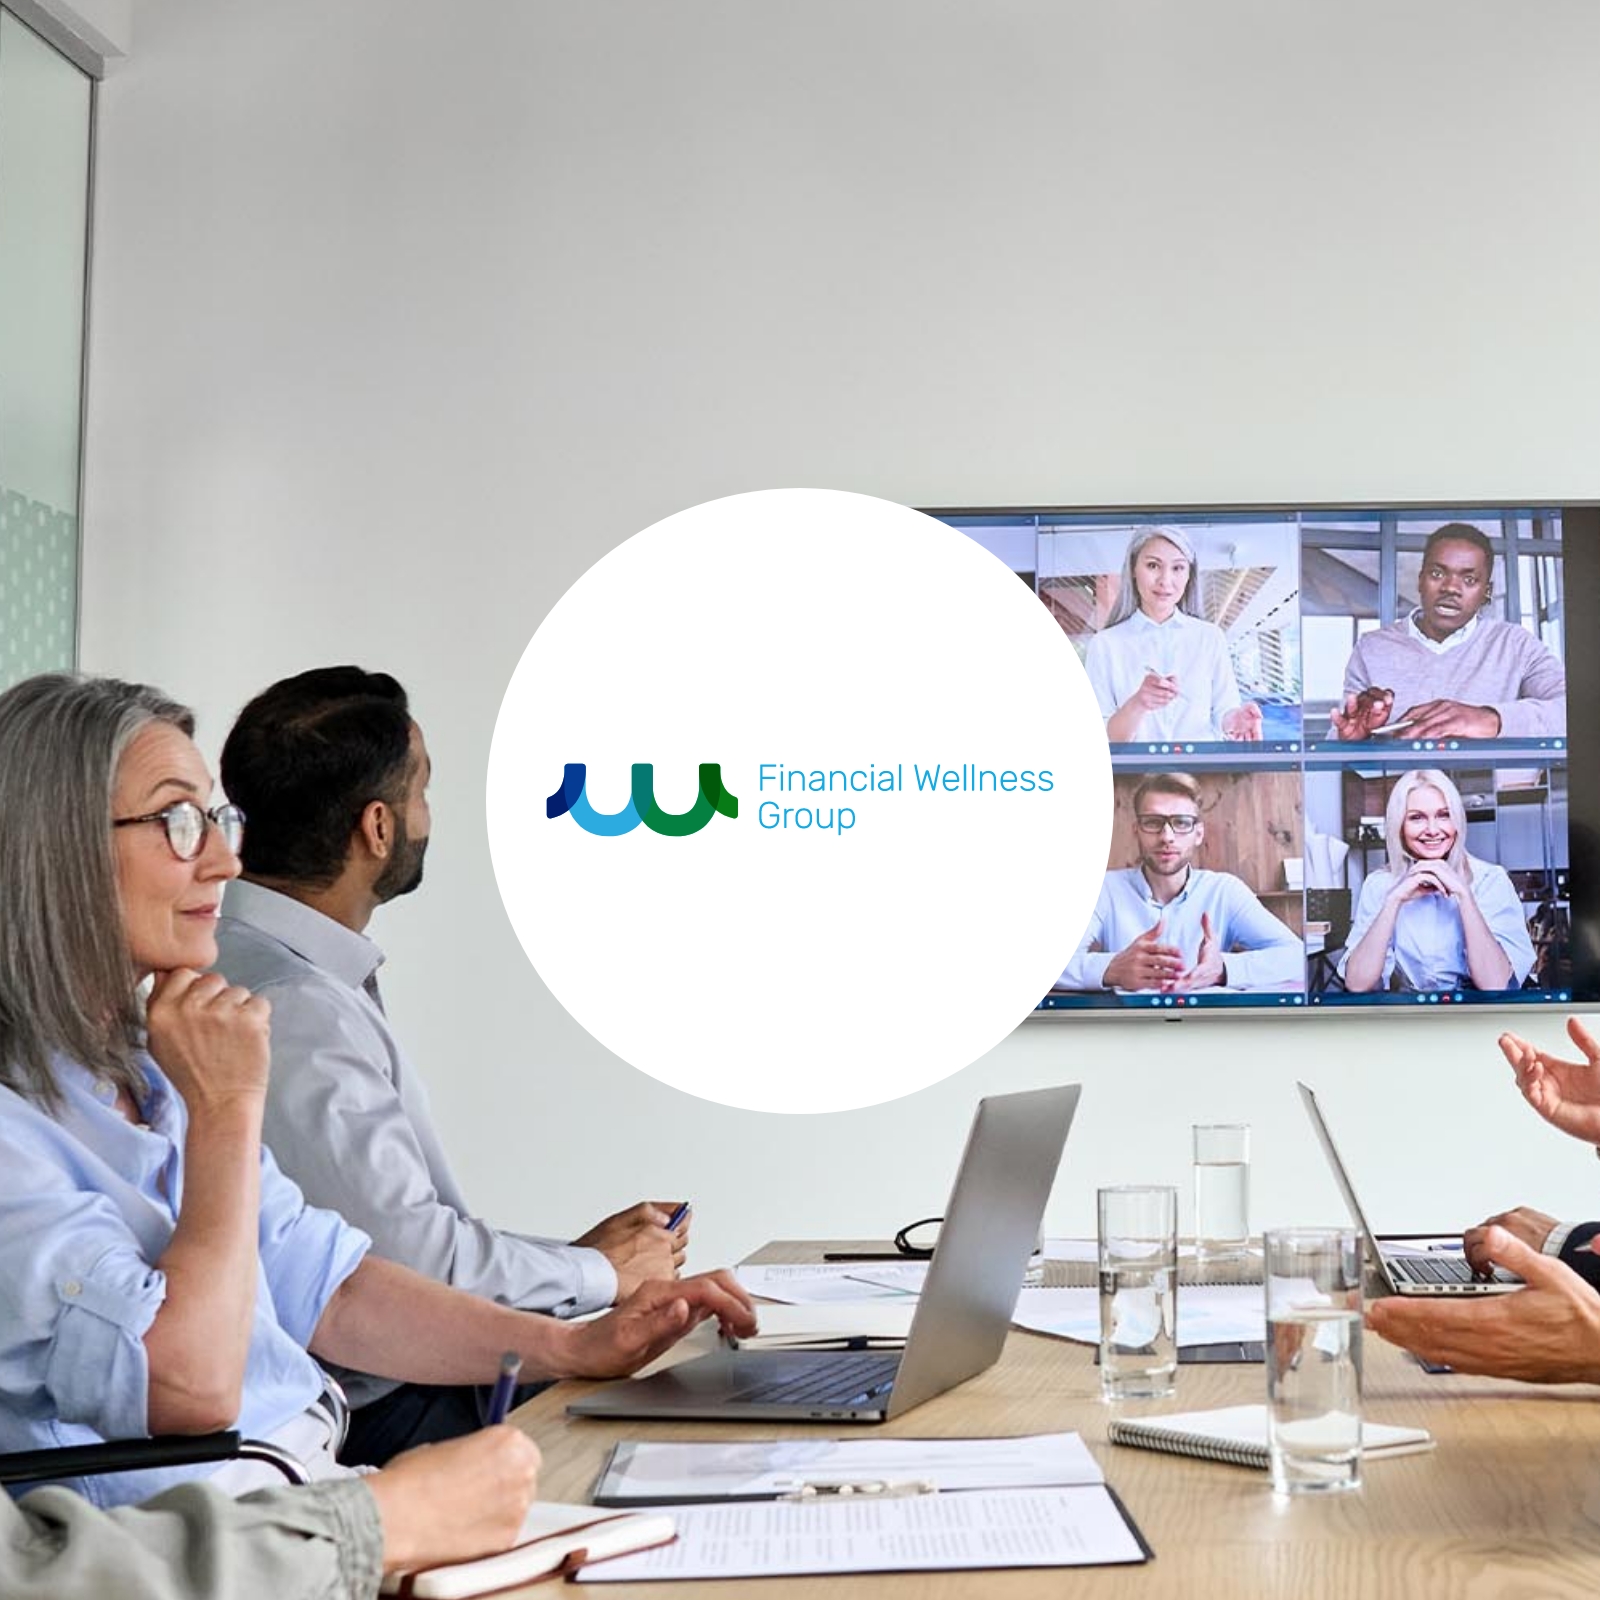 Providing collaborative meetings for all participants, no matter where they join from